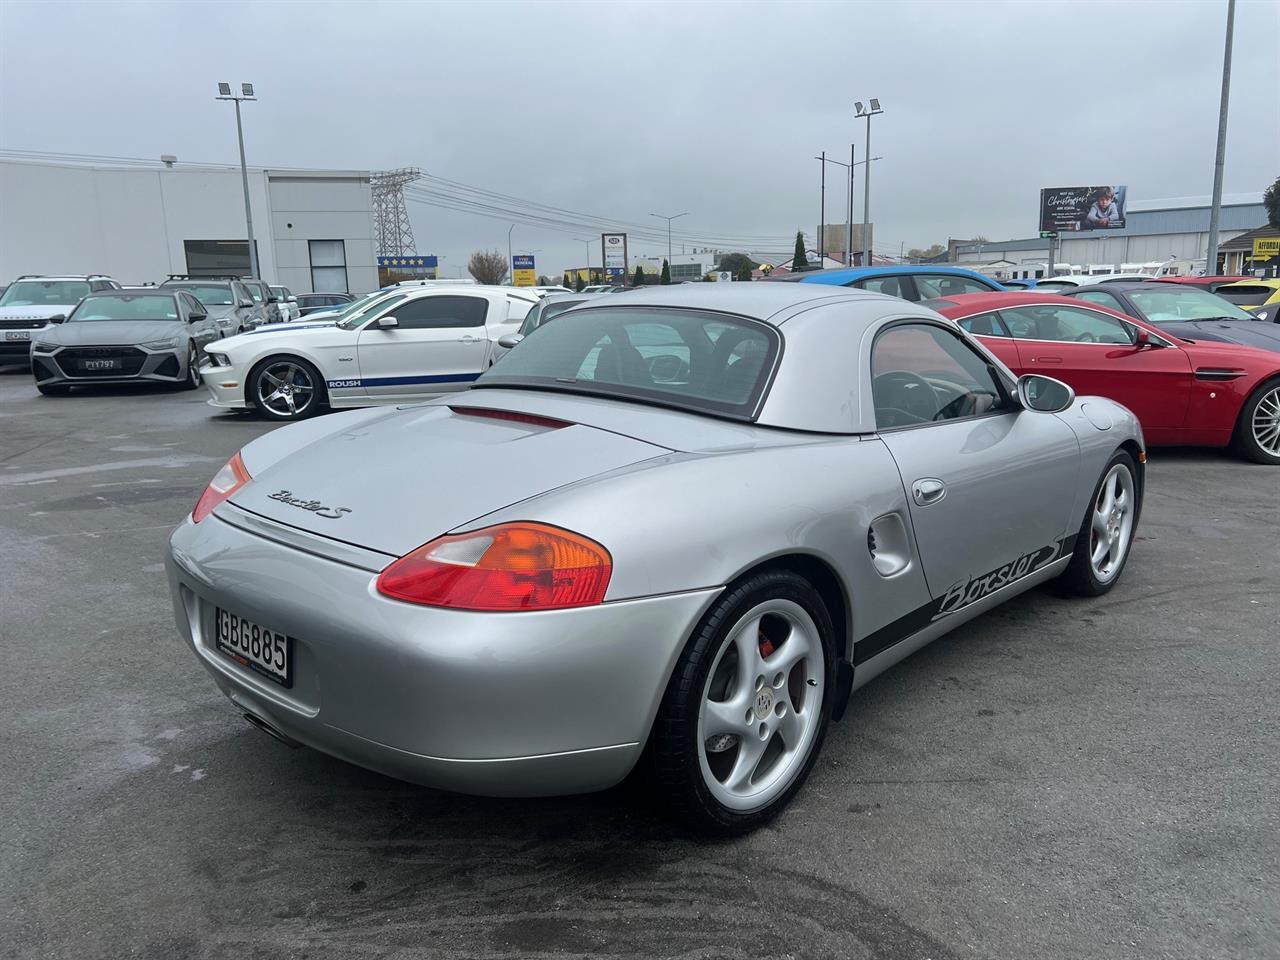 image-5, 2000 Porsche Boxster S 6 Speed Manual at Christchurch